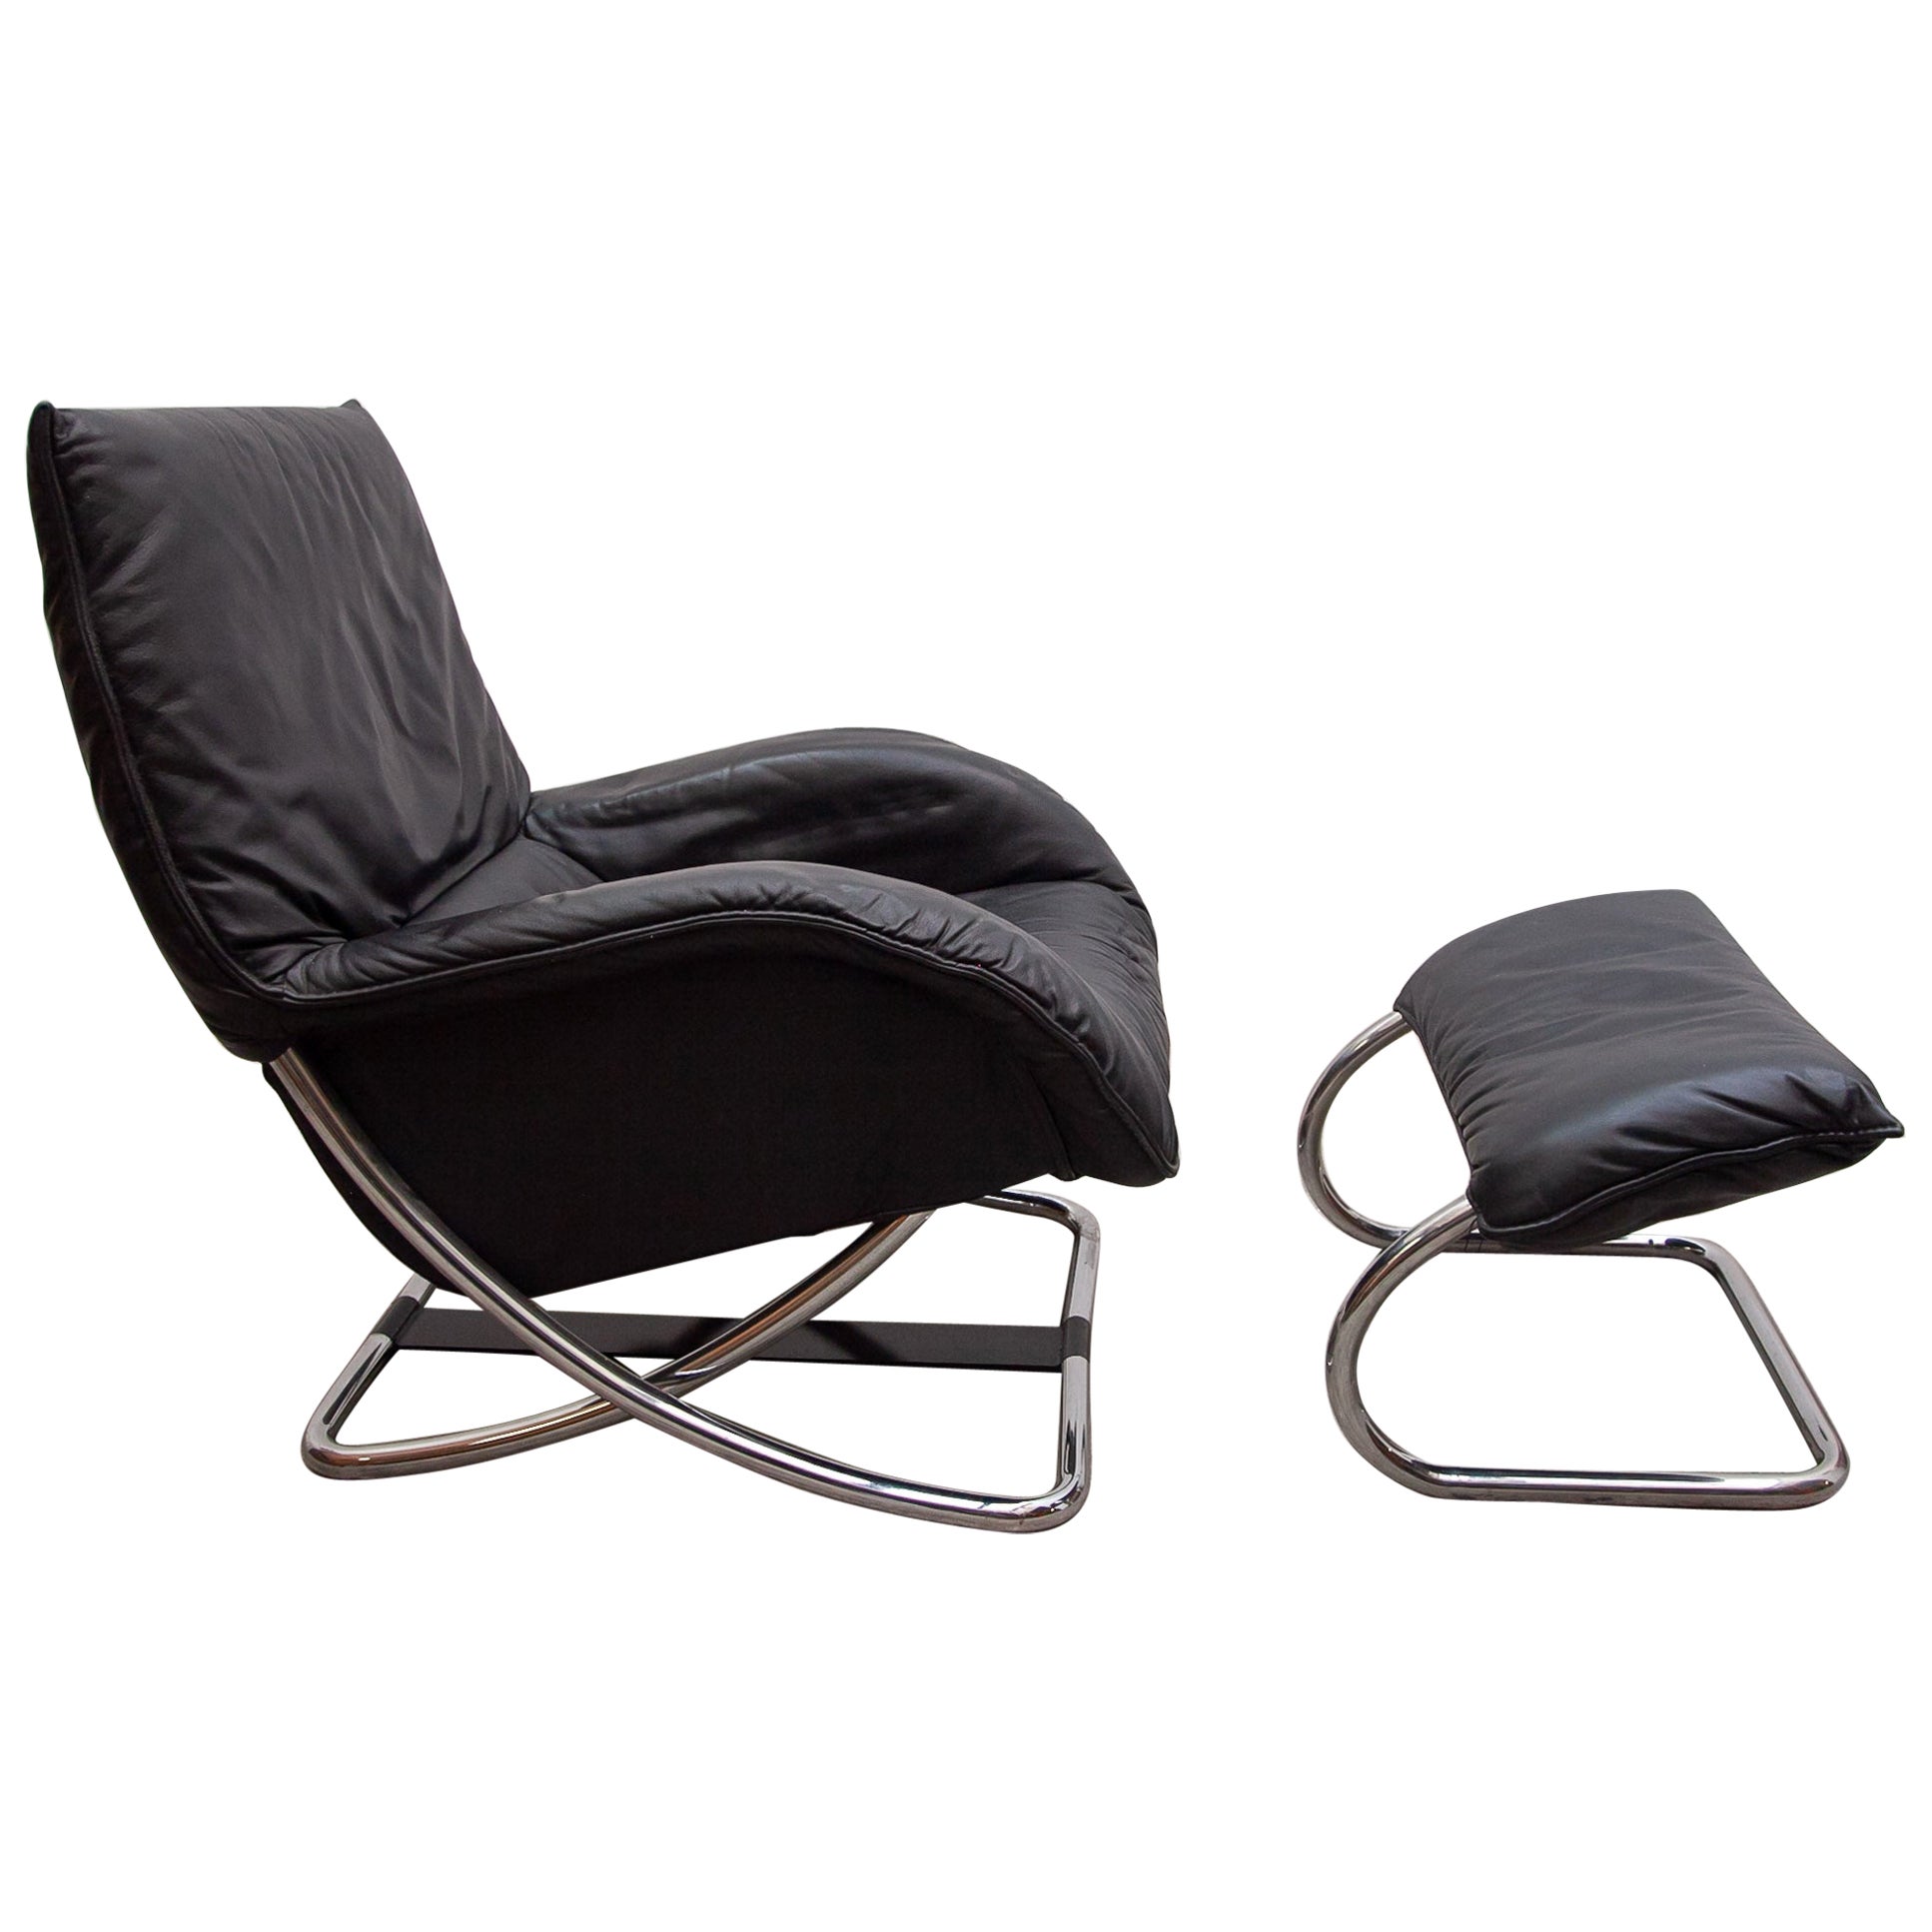 Robert Haussmann Style Chrome Rocking Lounge Chair with Footstool, 1980s For Sale